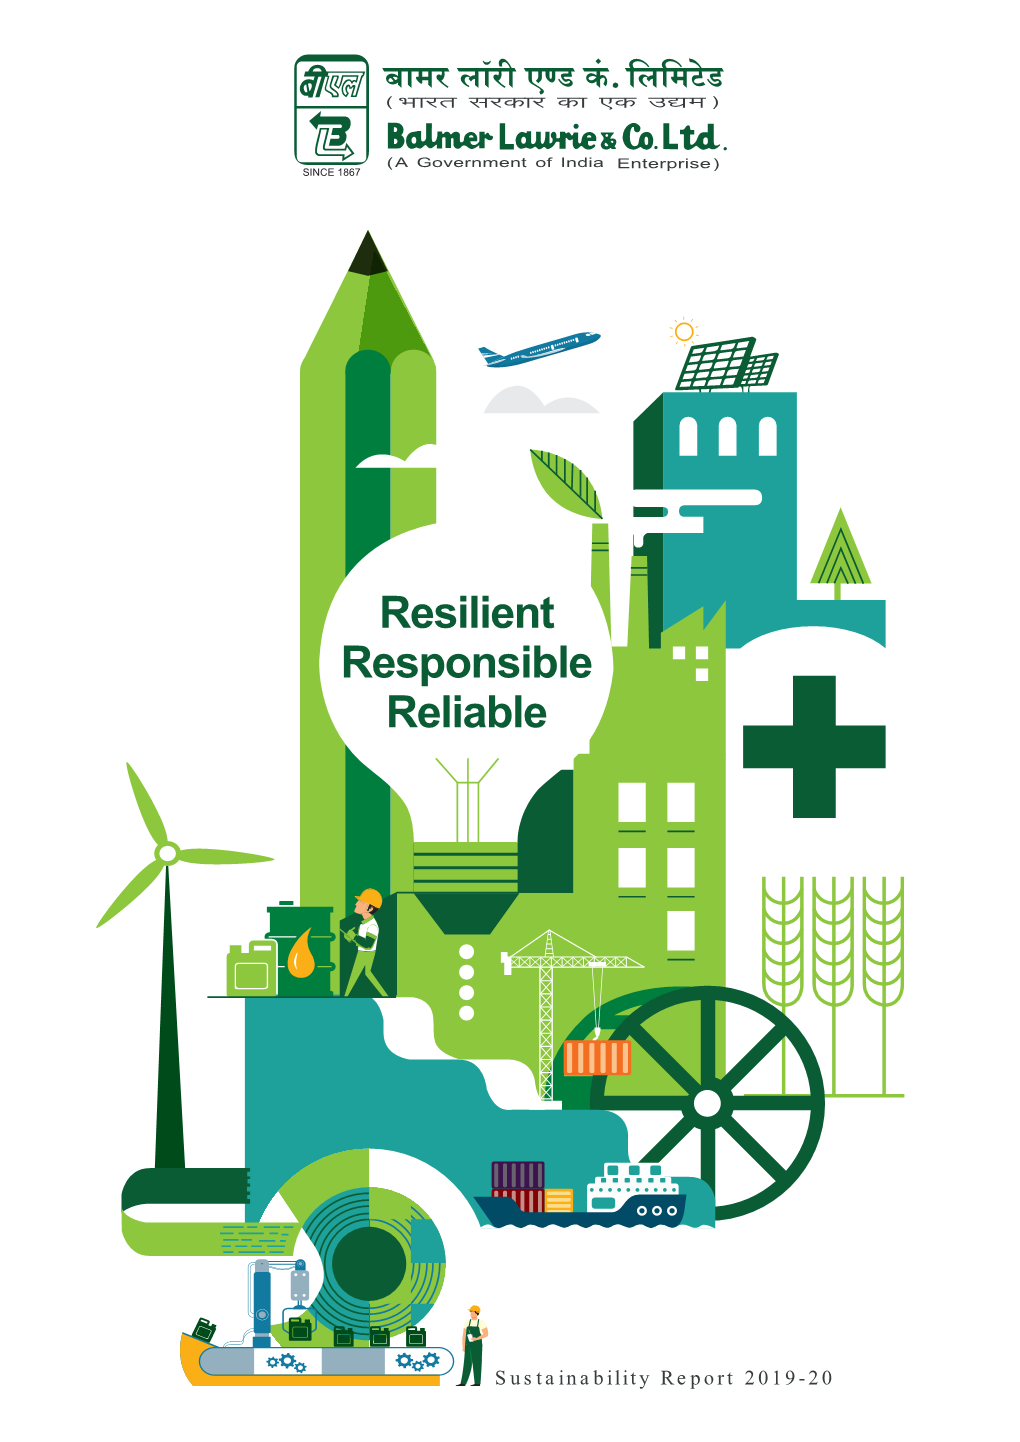 BL Sustainability Report 2019-20